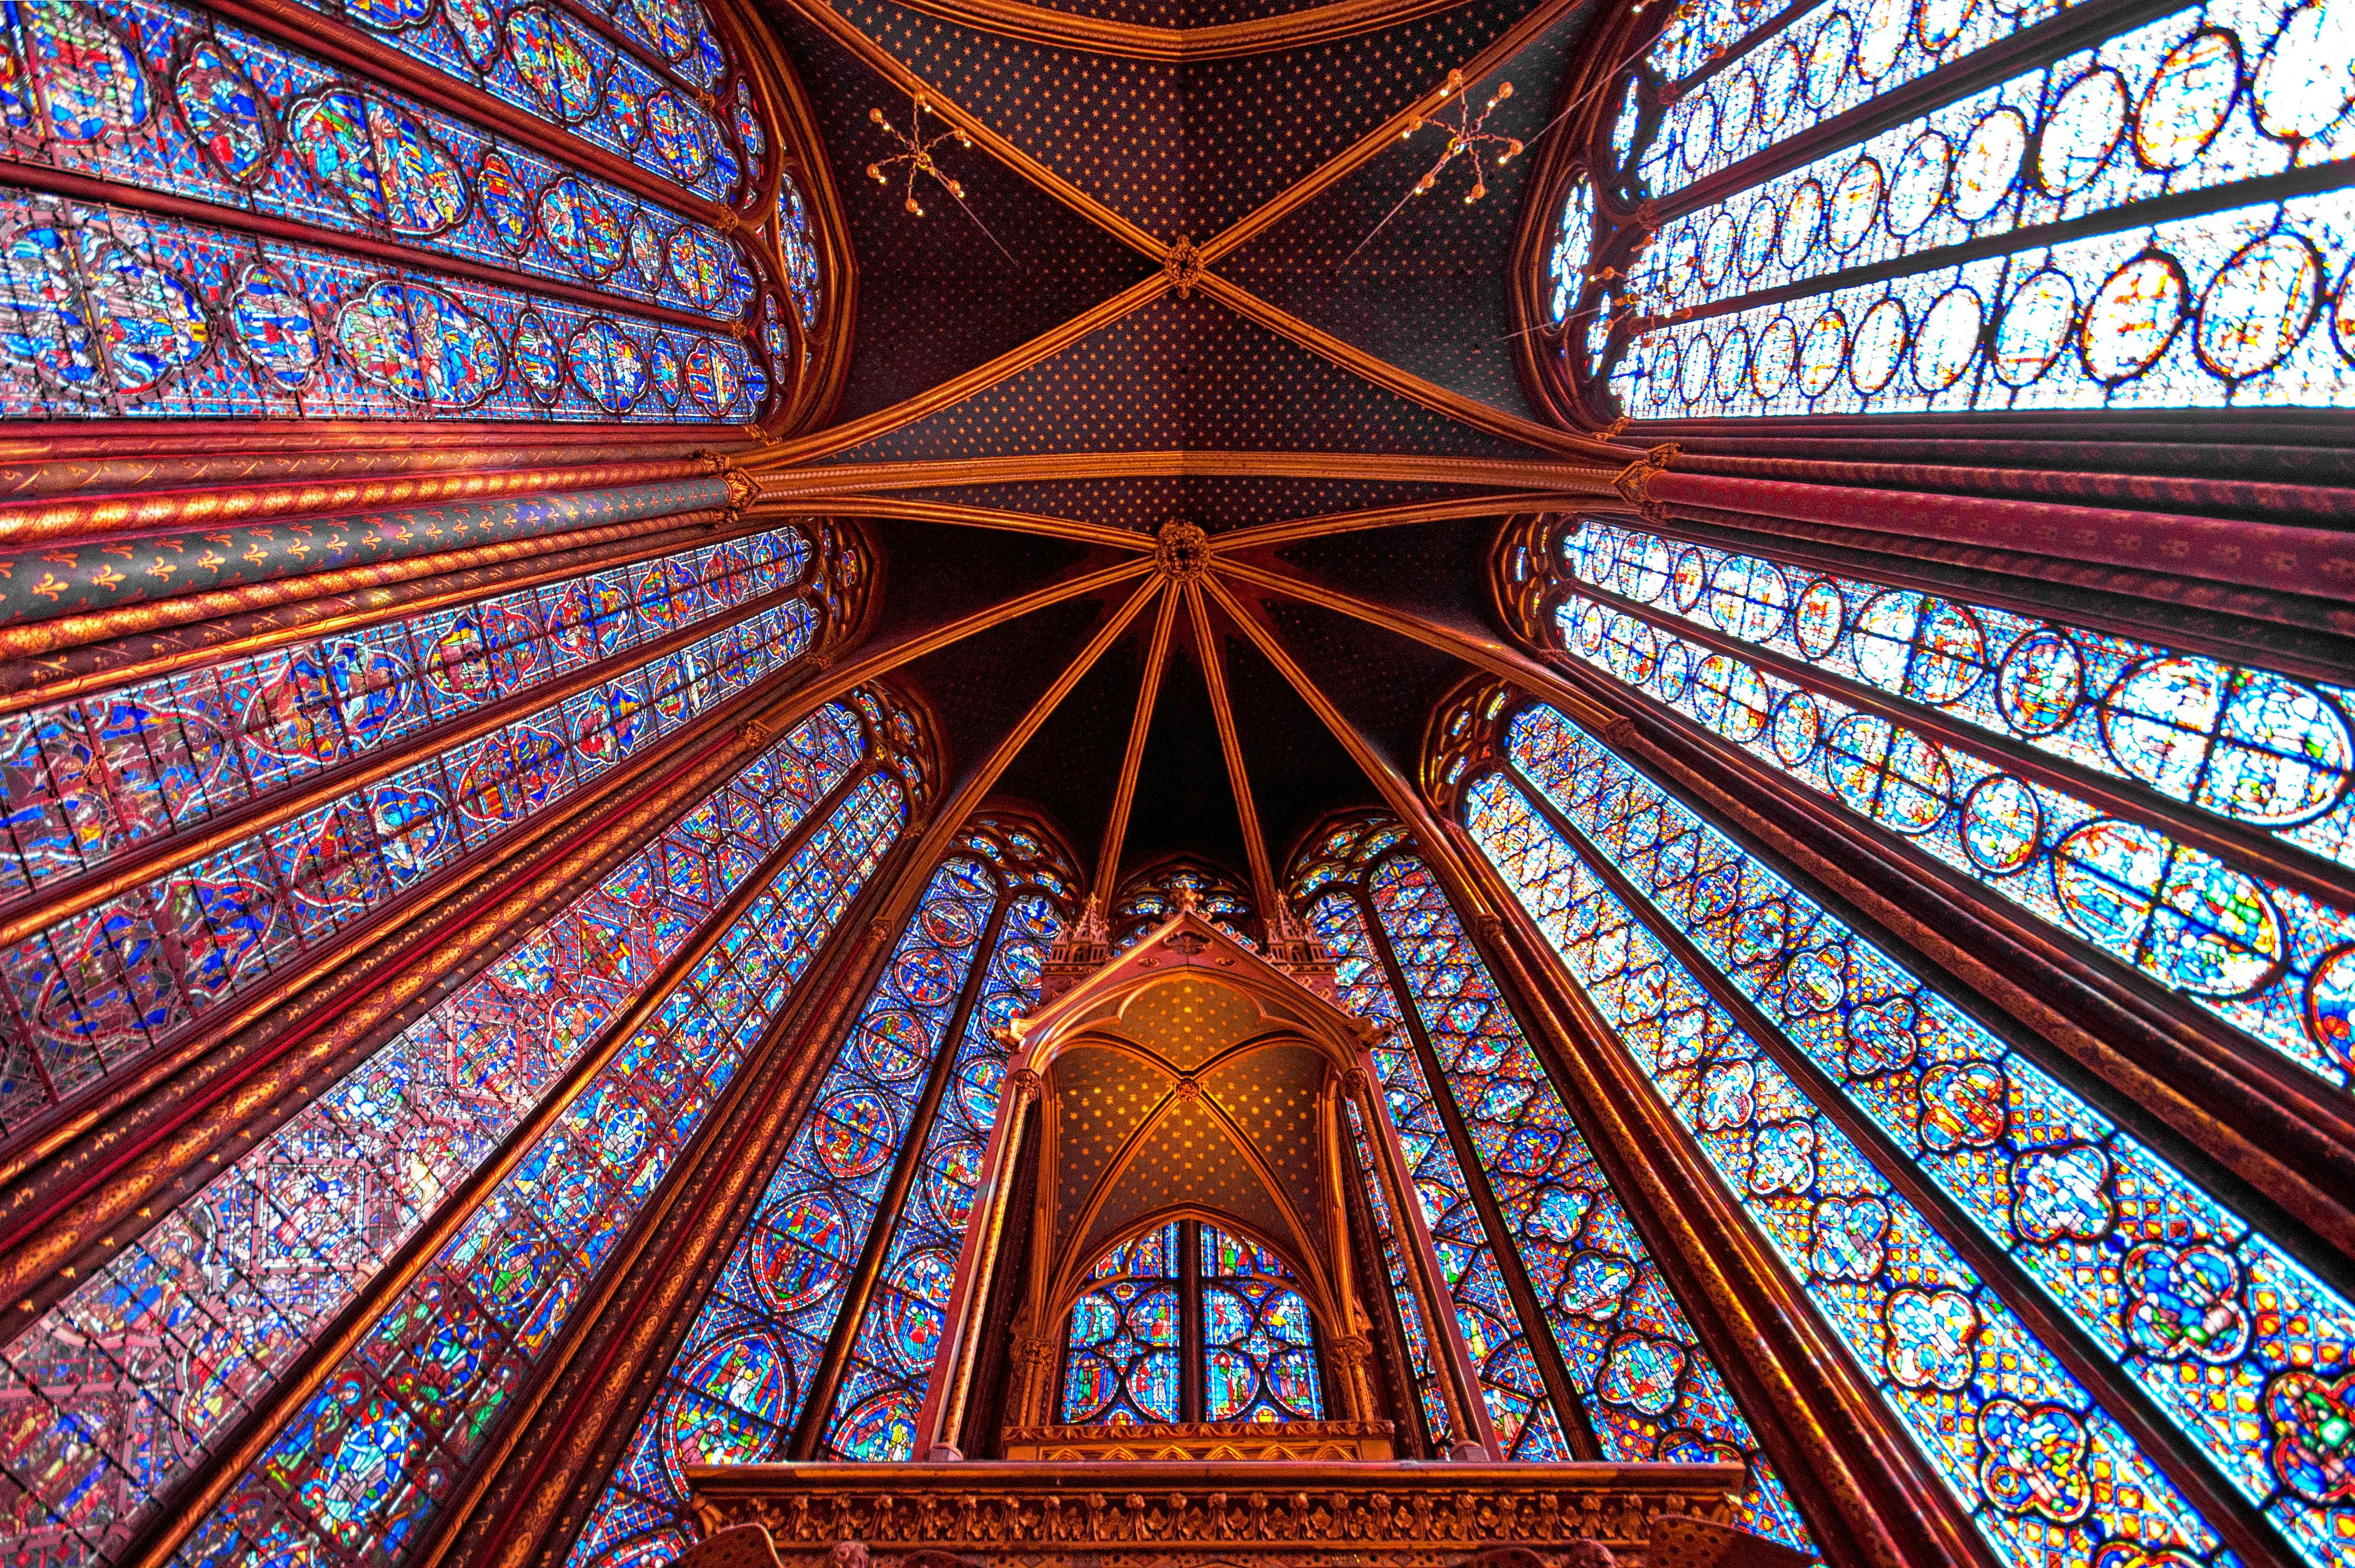 Priority tickets for the Sainte-Chapelle